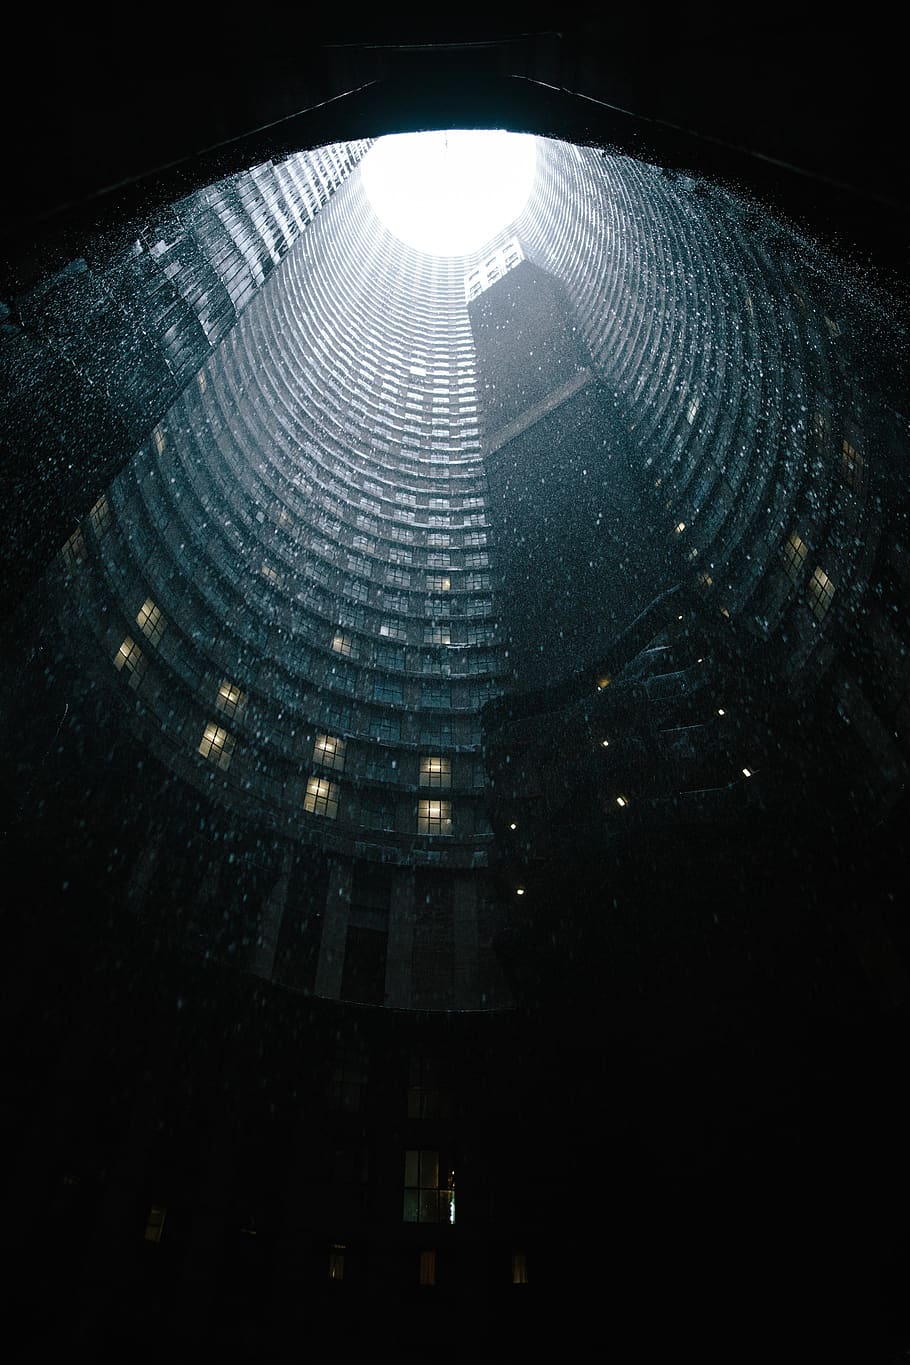 architecture, building, infrastructure, skyscraper, tower, dark, rain, raining, built structure, low angle view